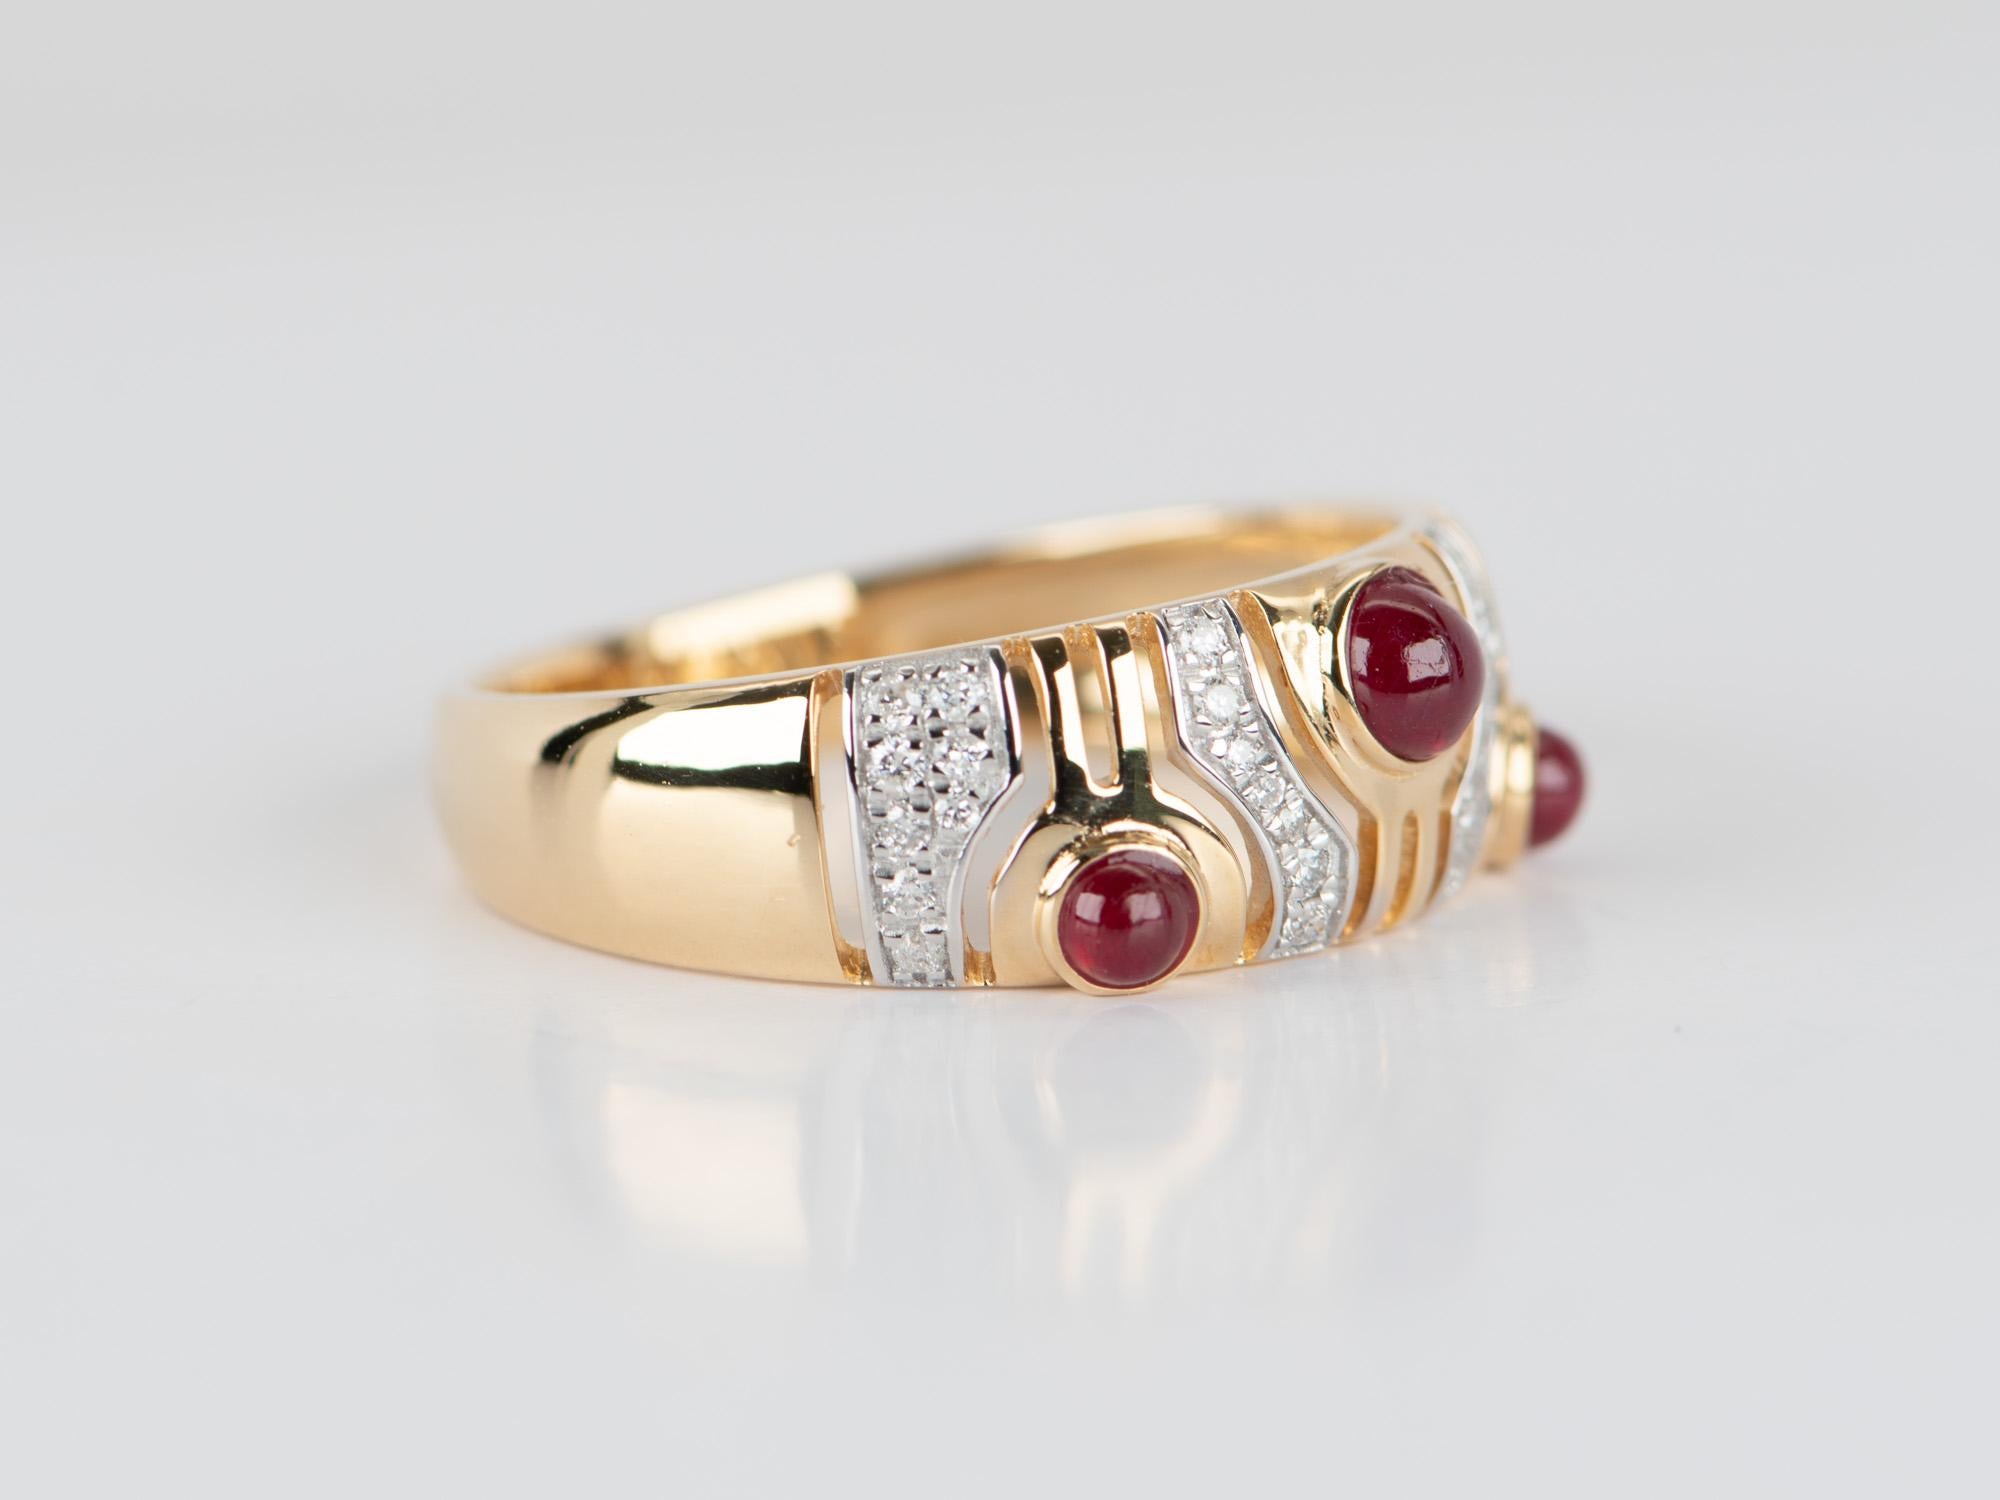 Uncut 18K Gold Ruby and Diamond Wedding Band Light Weight R5072 For Sale